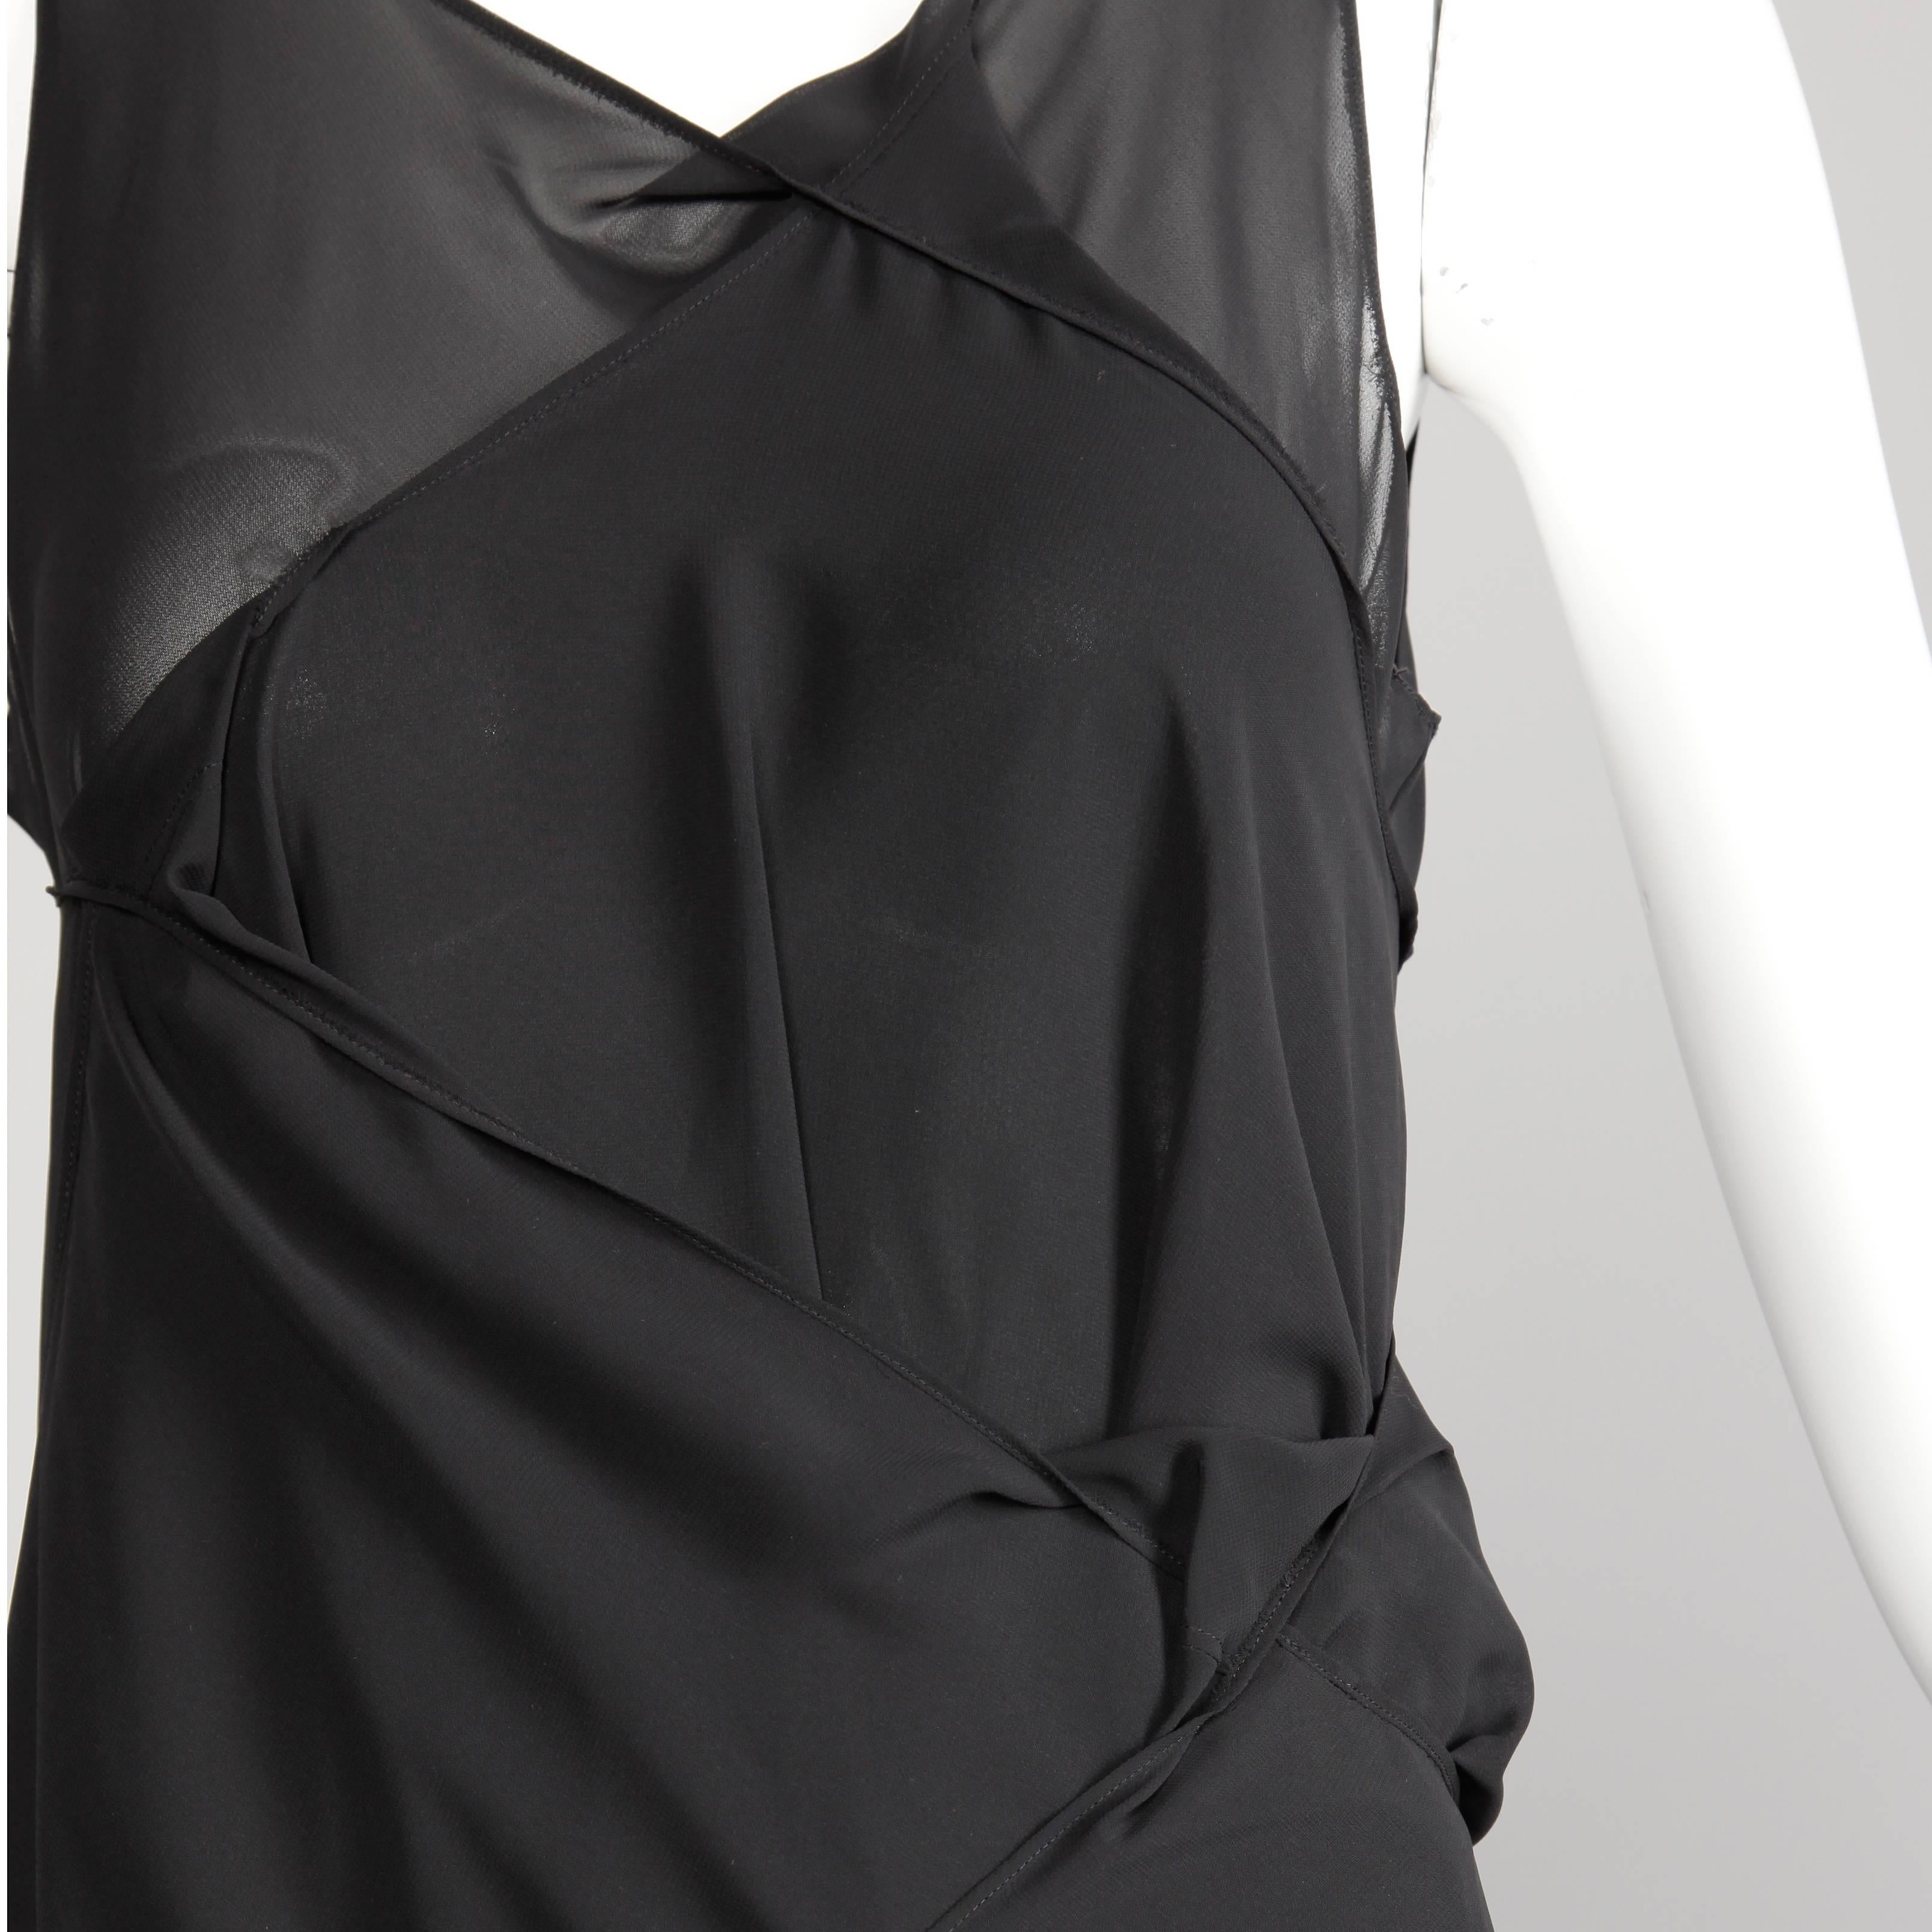 Junya Watanabe Comme des Garcons Avant Garde Black Draped Asymmetric Dress In Excellent Condition For Sale In Sparks, NV